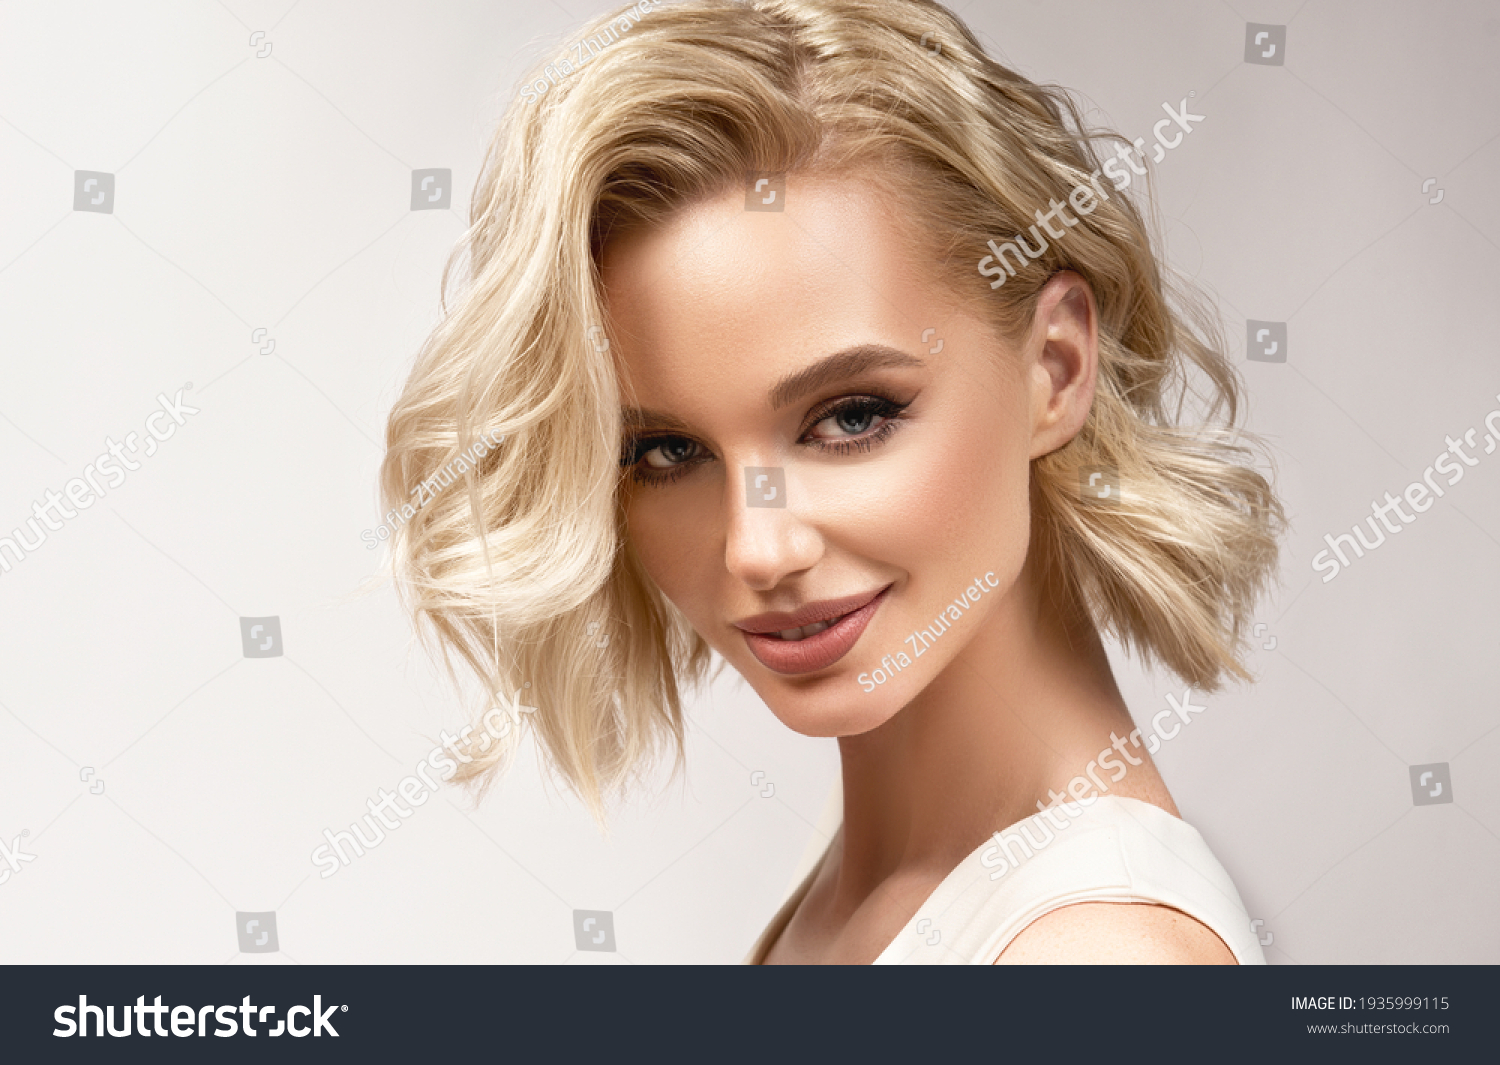 Beautiful model girl with short hair .Beauty woman with blonde curly hairstyle dye .Fashion, cosmetics and makeup #1935999115